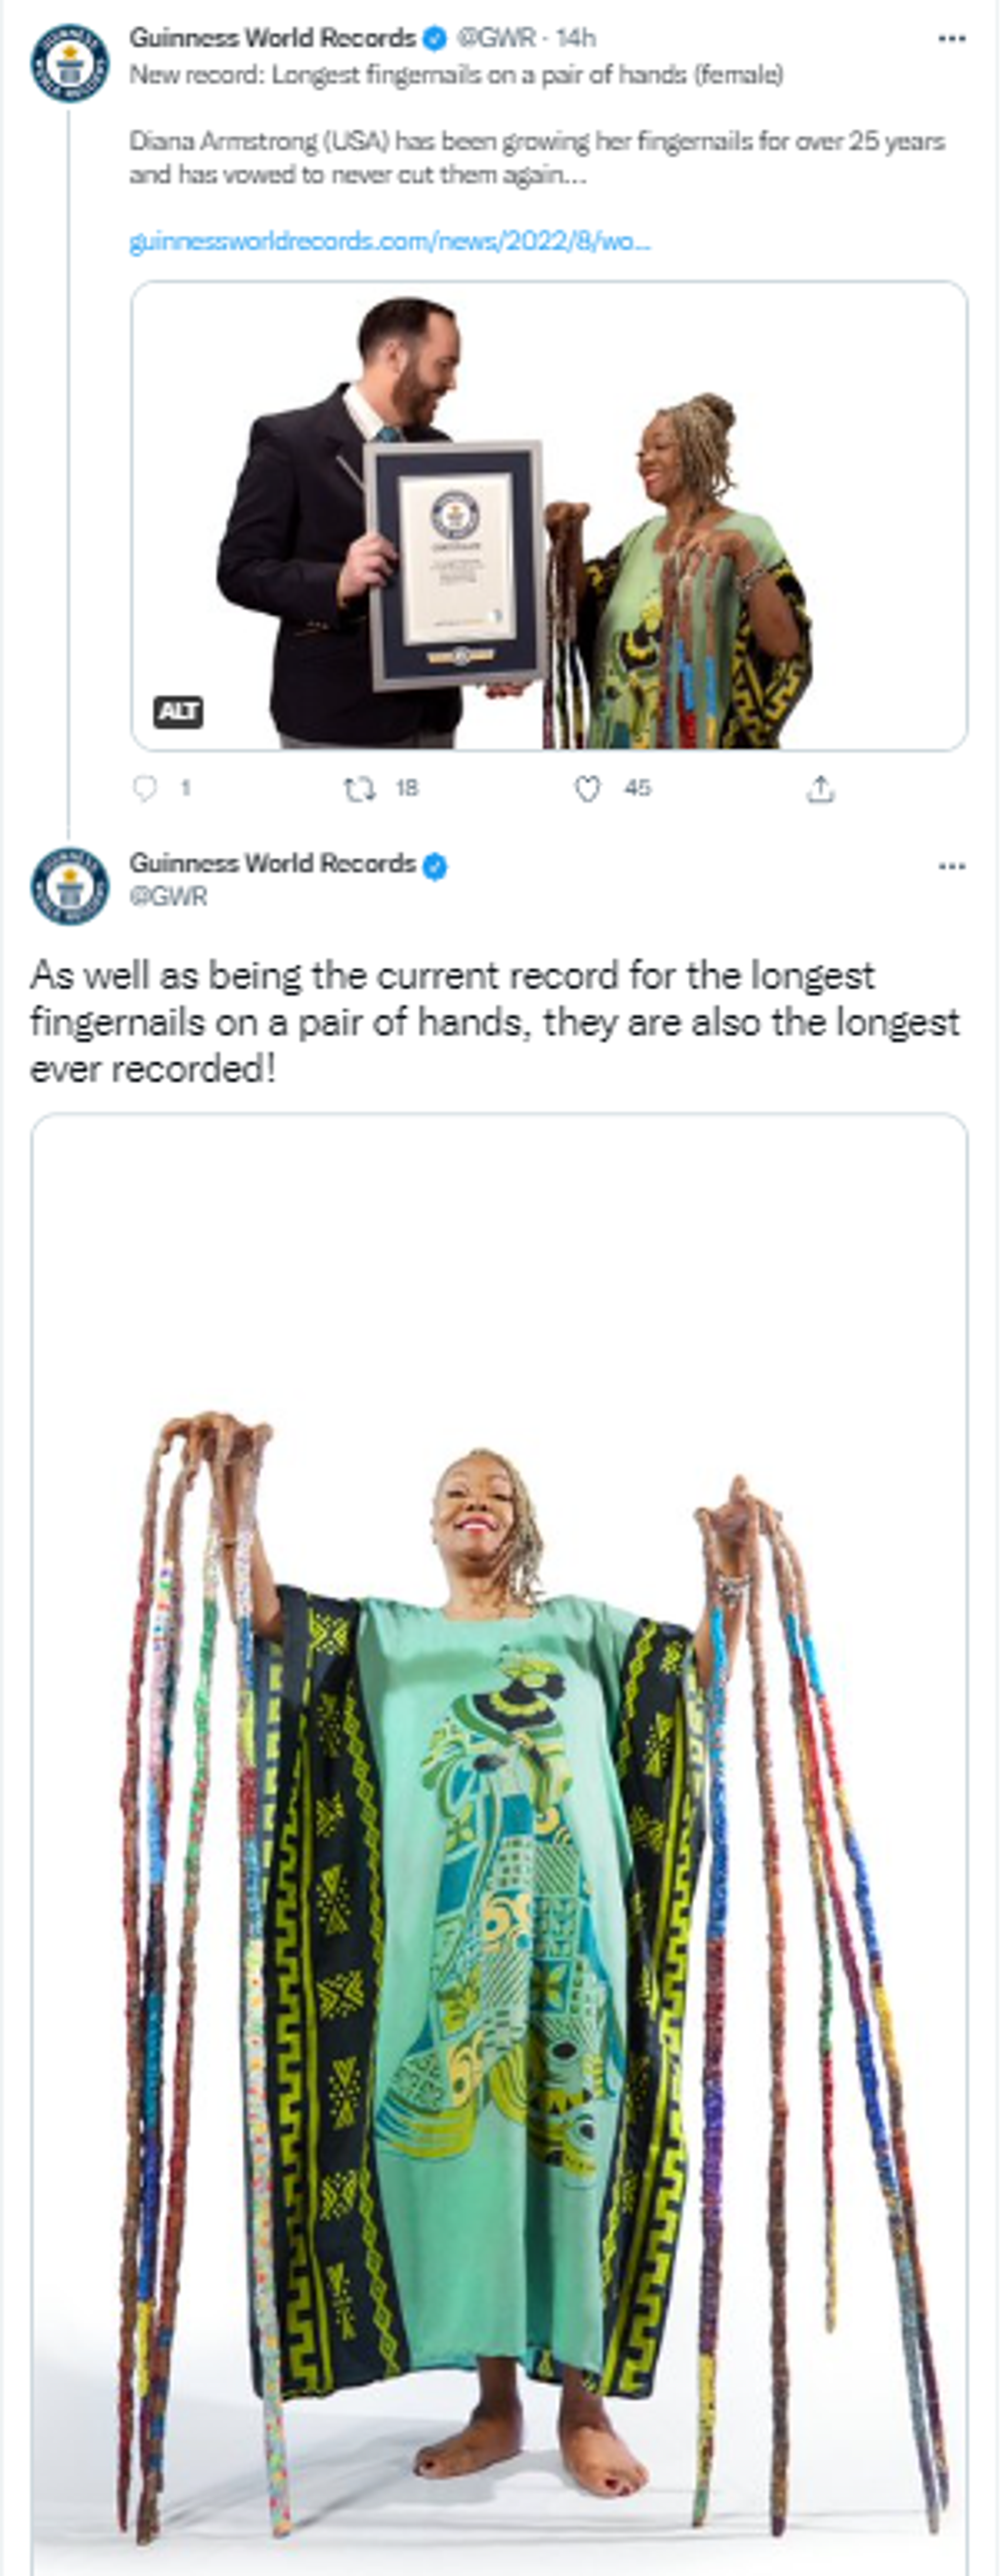 Woman breaks Guinness World Record for having over 42 feet long nails after not cutting them for 25 years - Sputnik International, 1920, 03.08.2022